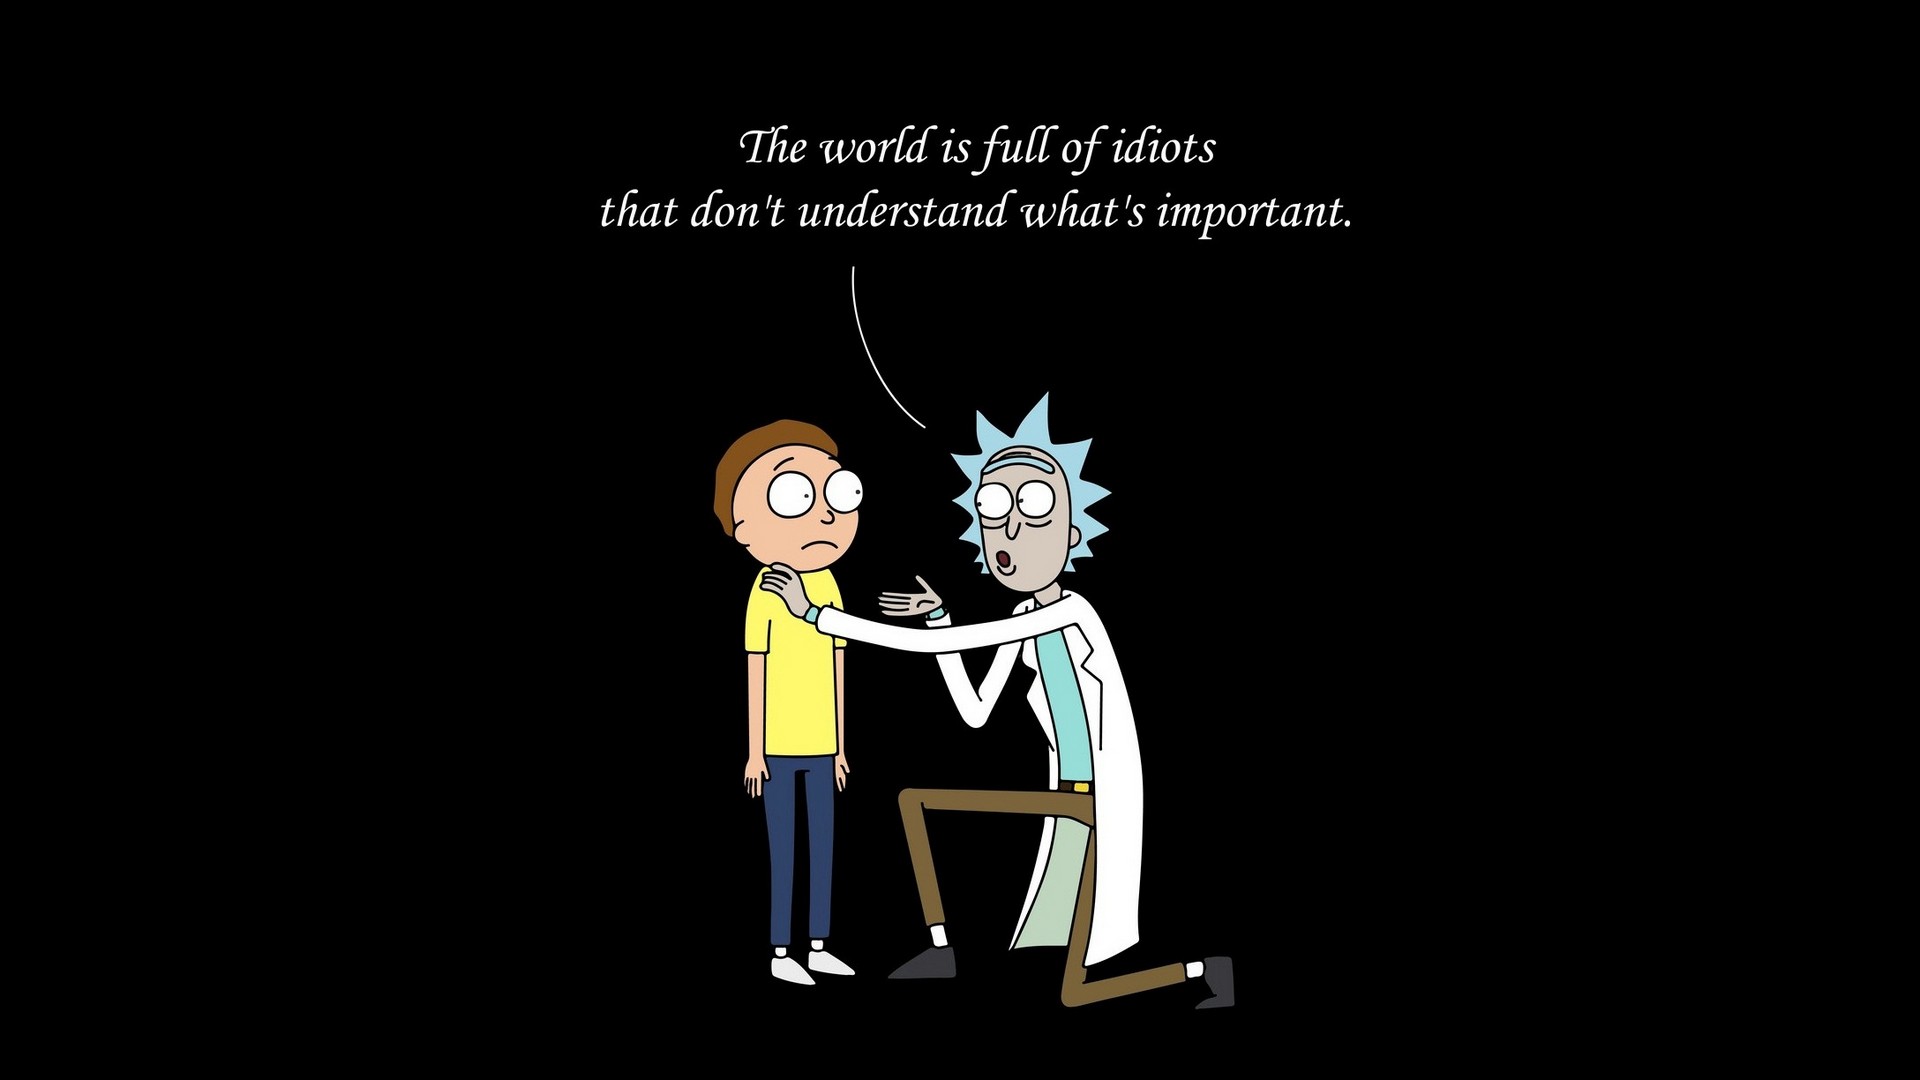 Cartoon Network Rick and Morty Desktop Wallpaper with image resolution 1920x1080 pixel. You can use this wallpaper as background for your desktop Computer Screensavers, Android or iPhone smartphones